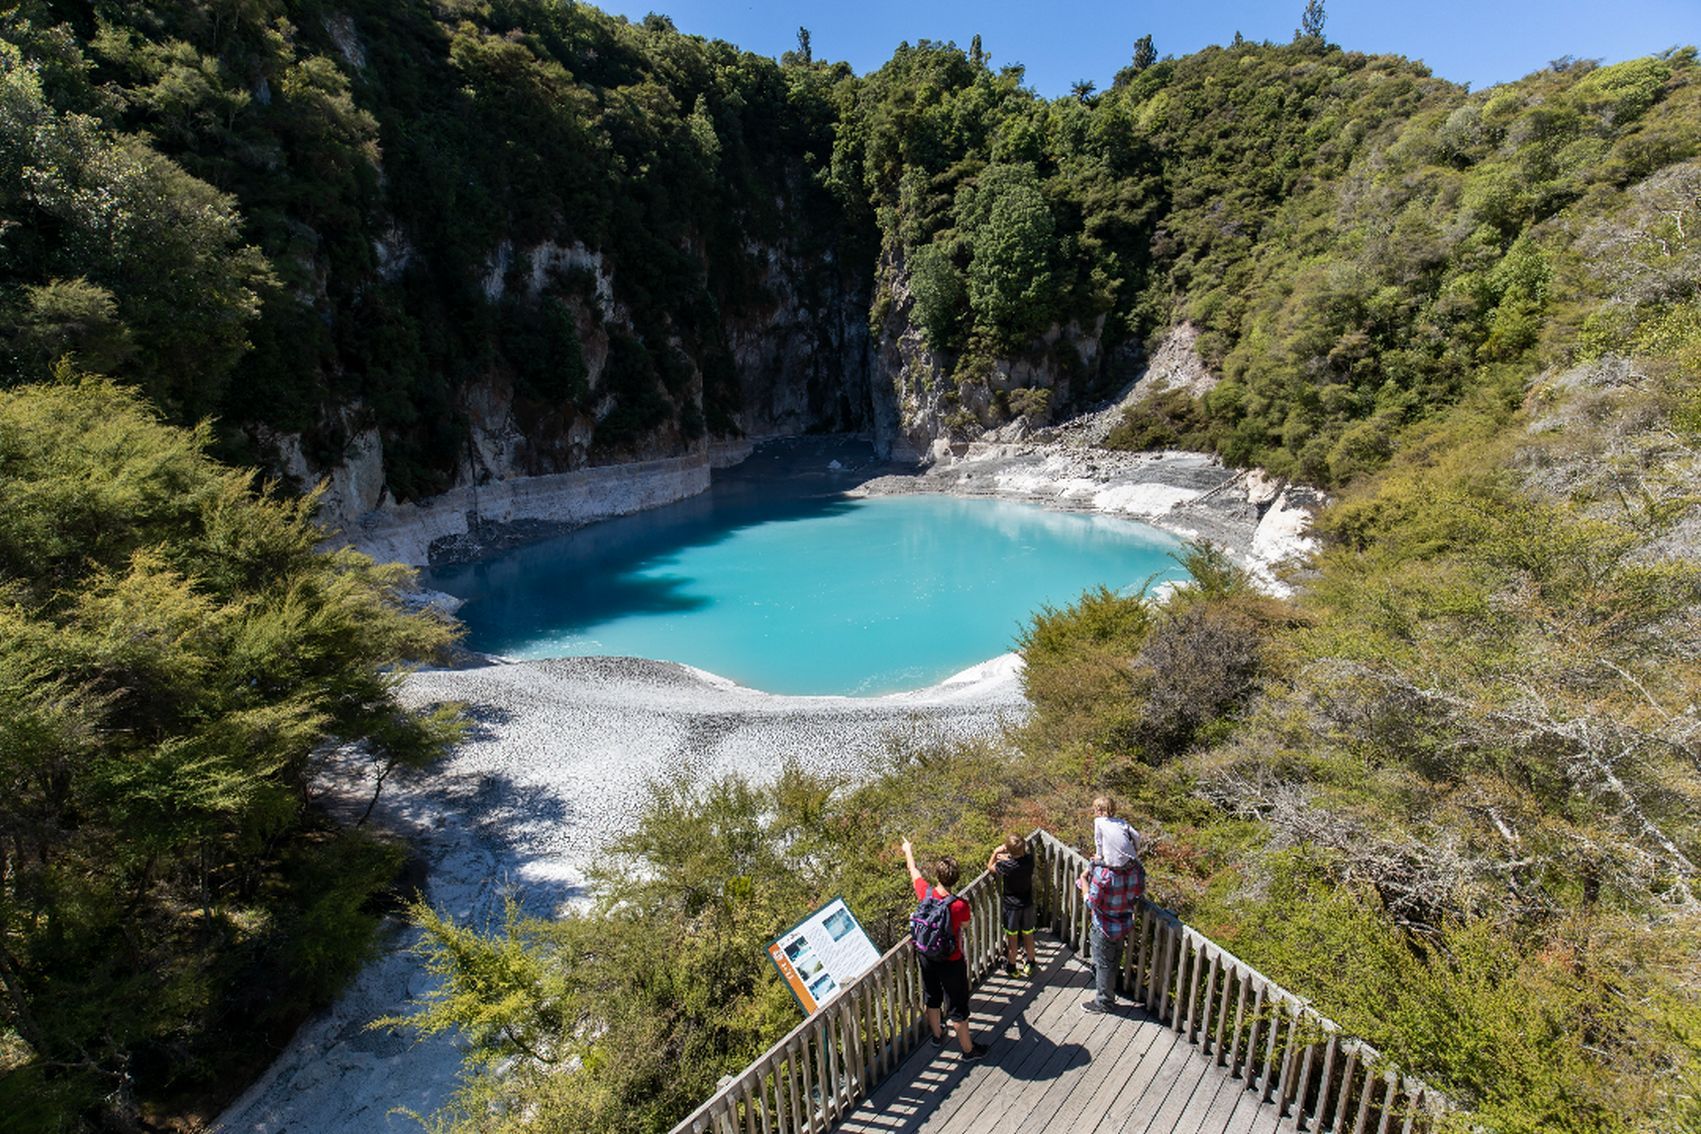 Rotorua’s geothermal power and grace